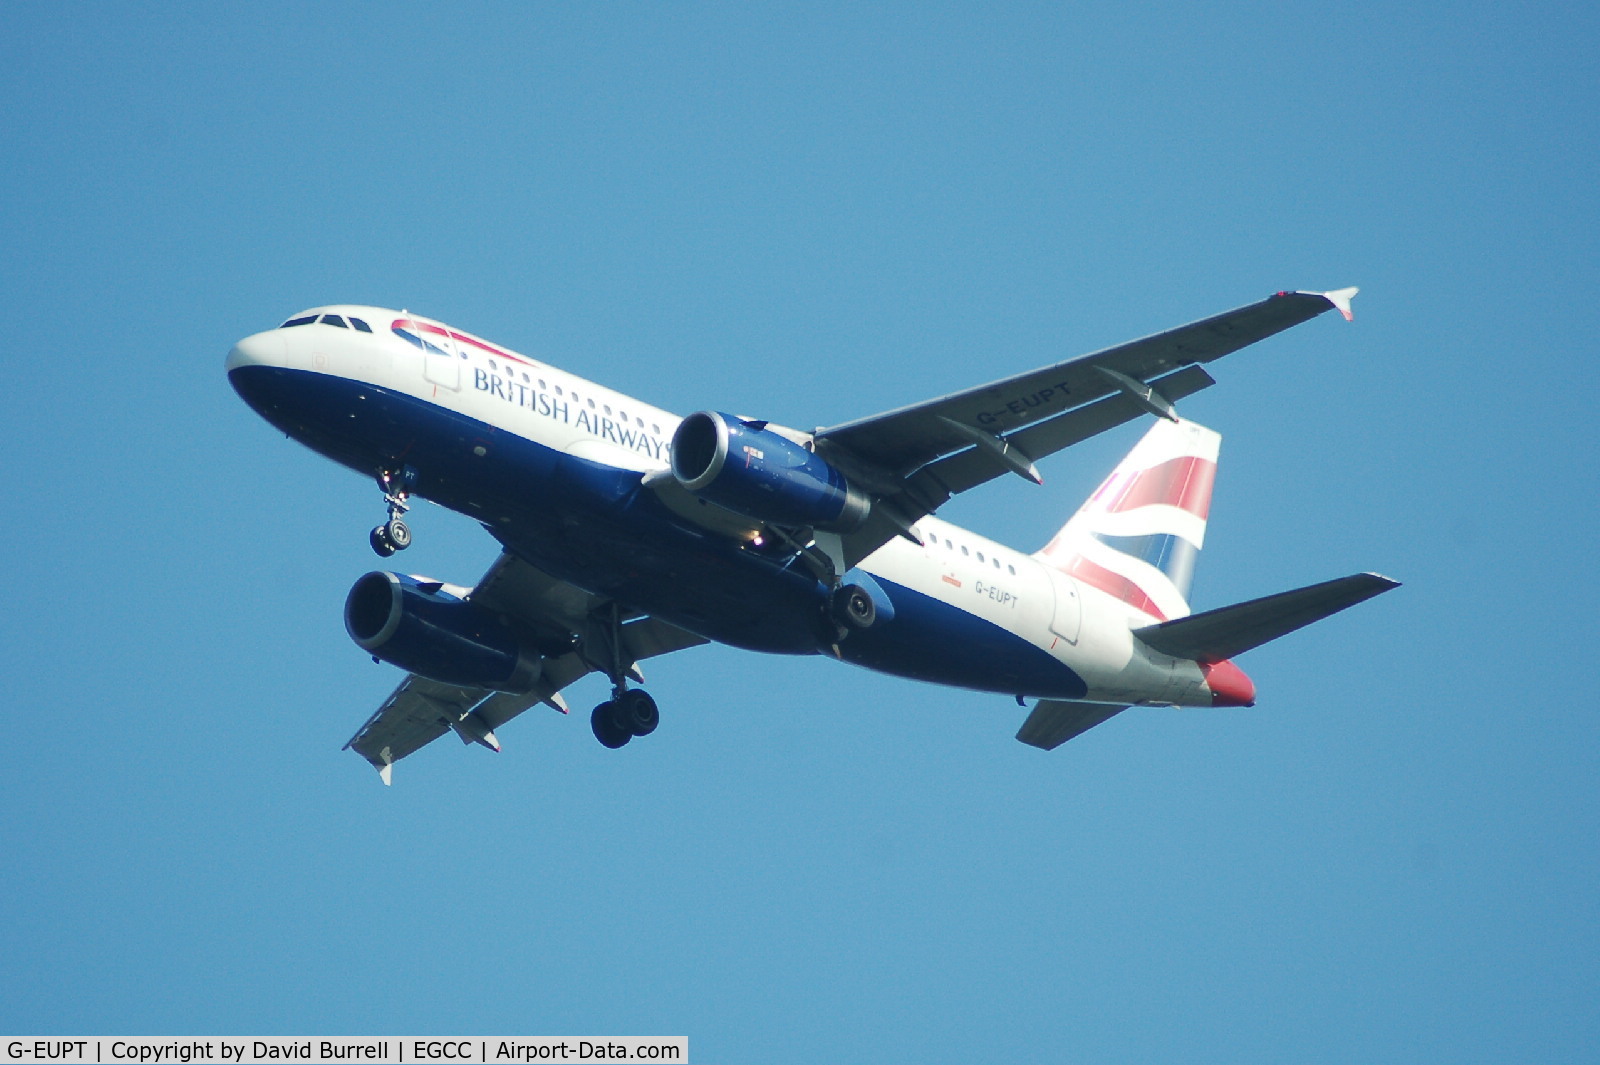 G-EUPT, 2000 Airbus A319-131 C/N 1380, British Airways Airbus A319 On approach to Manchester Airport.